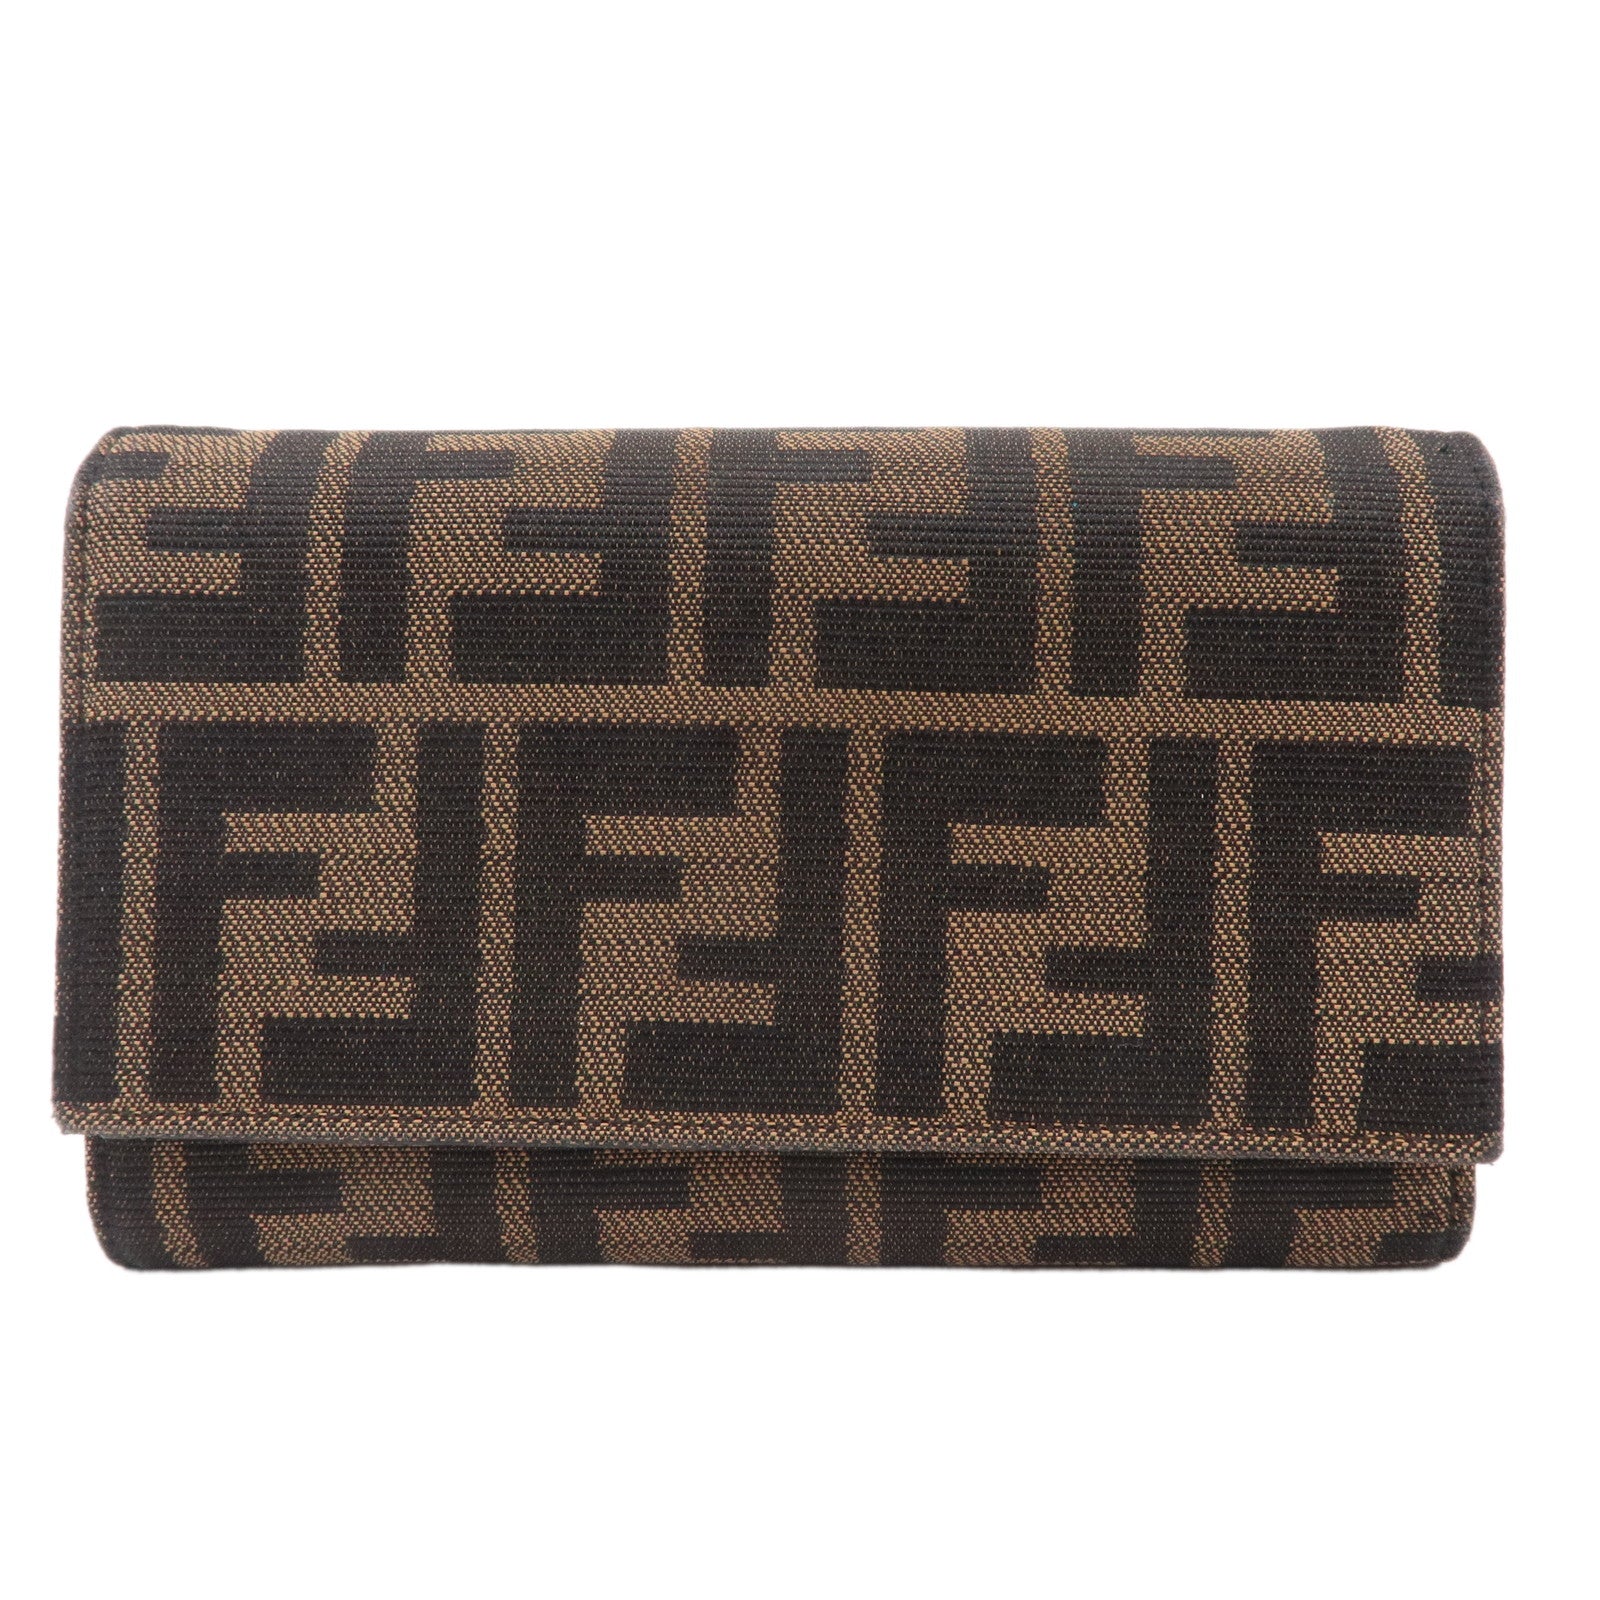 Fendi Continental Leather Wallet